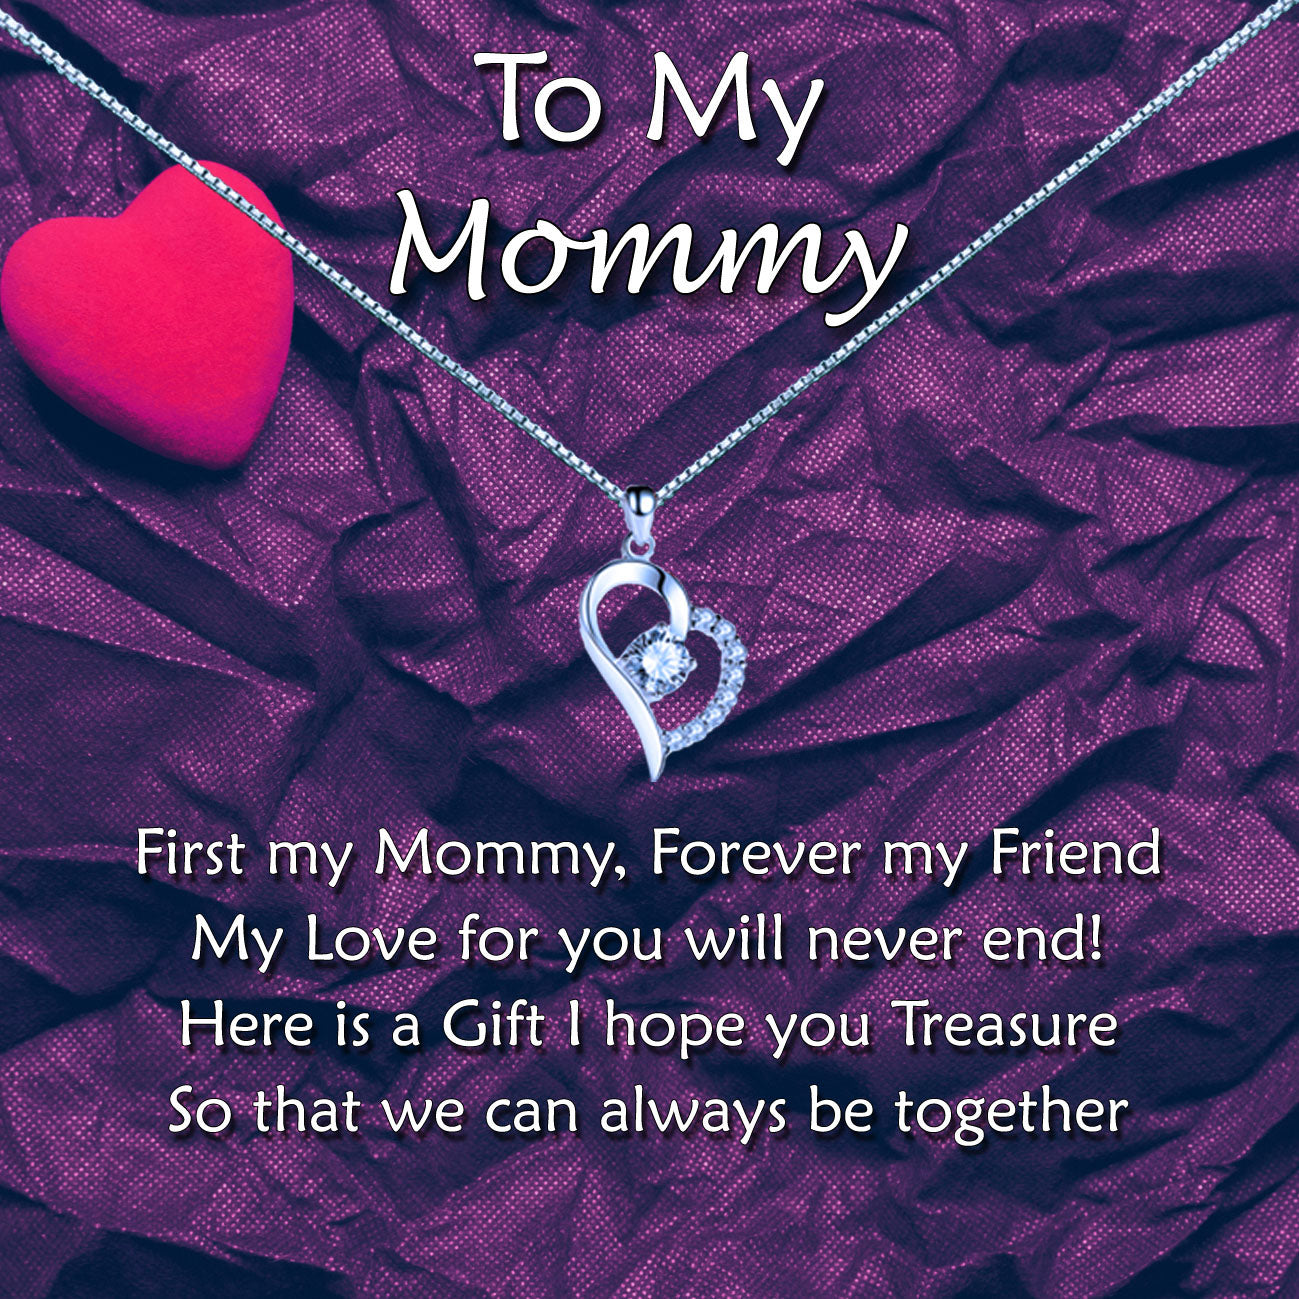 To My Mother - Purple Pink Heart Message Necklace